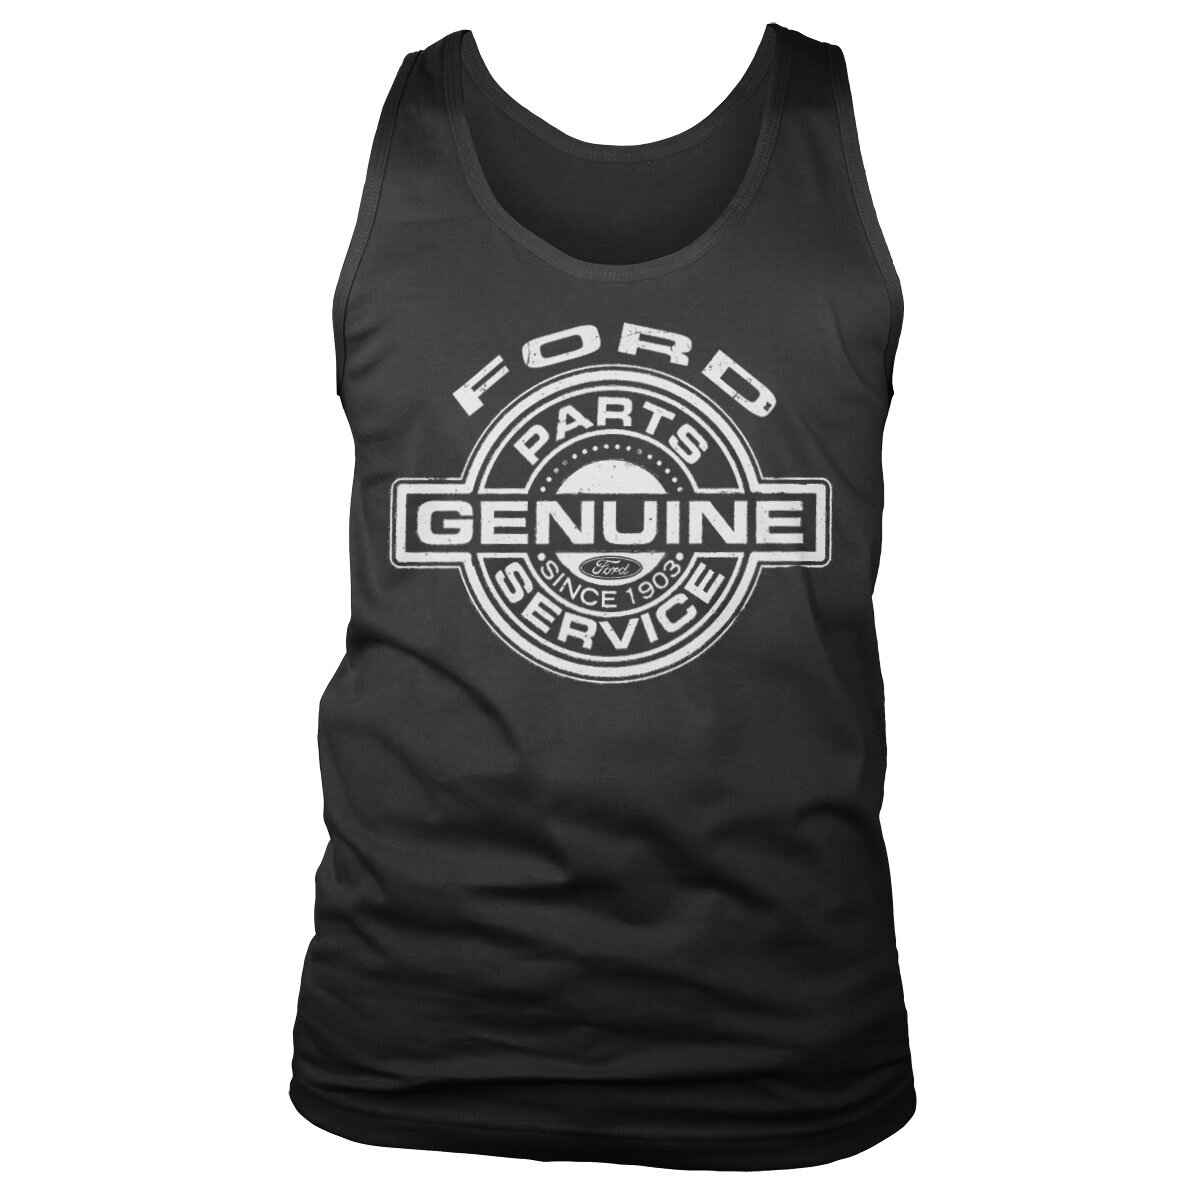 Ford - Genuine Parts And Service Tank Top